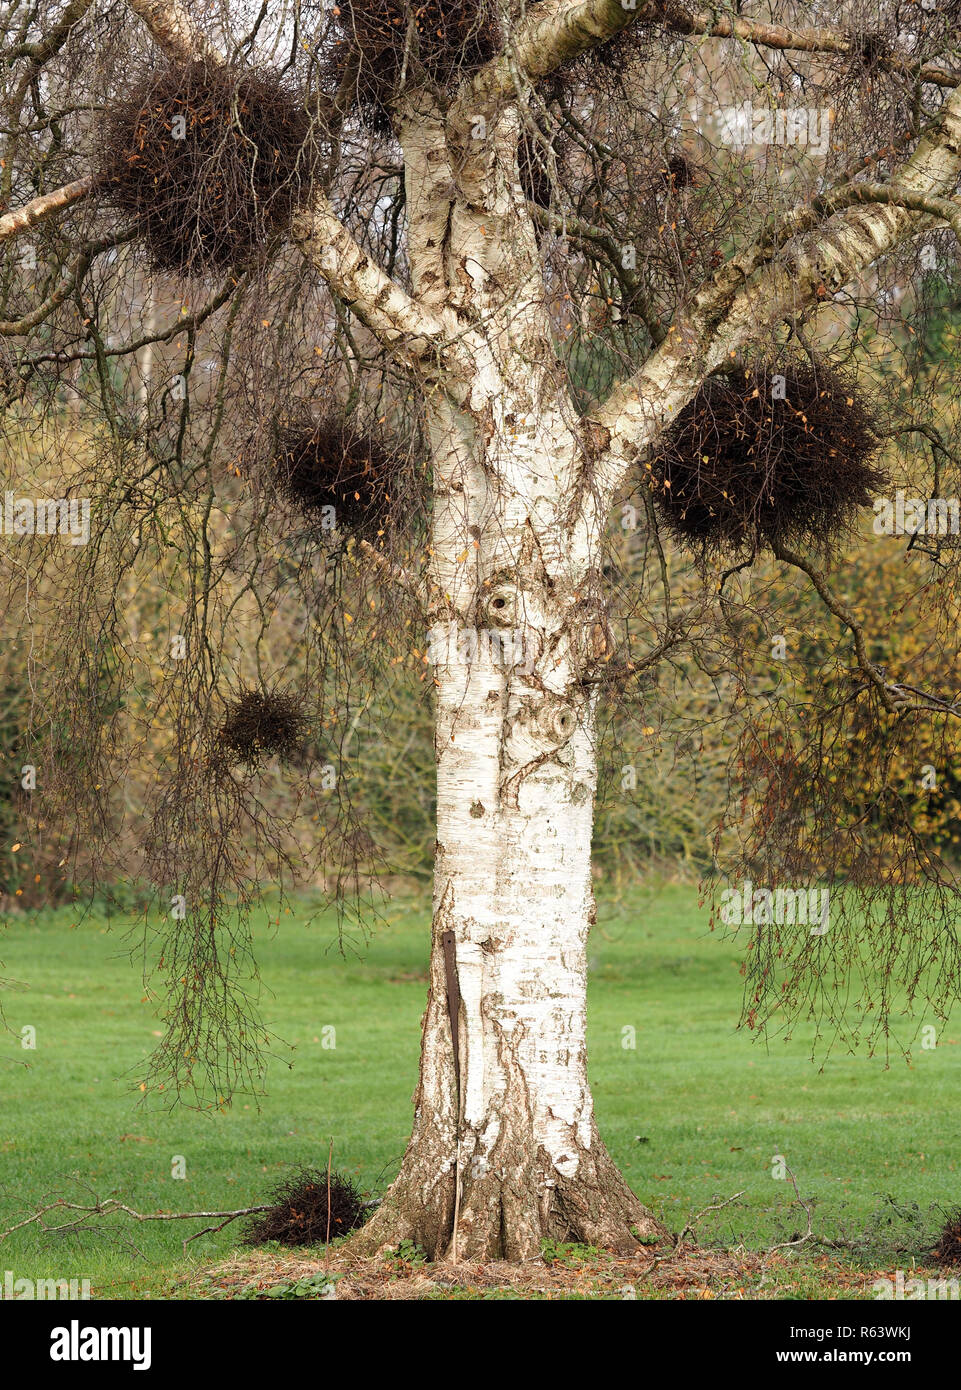 Birch tree infected with the fungus Witch's Broom (Taphrina betulina) at Rockwell college, Cashel, Tipperary, Ireland Stock Photo